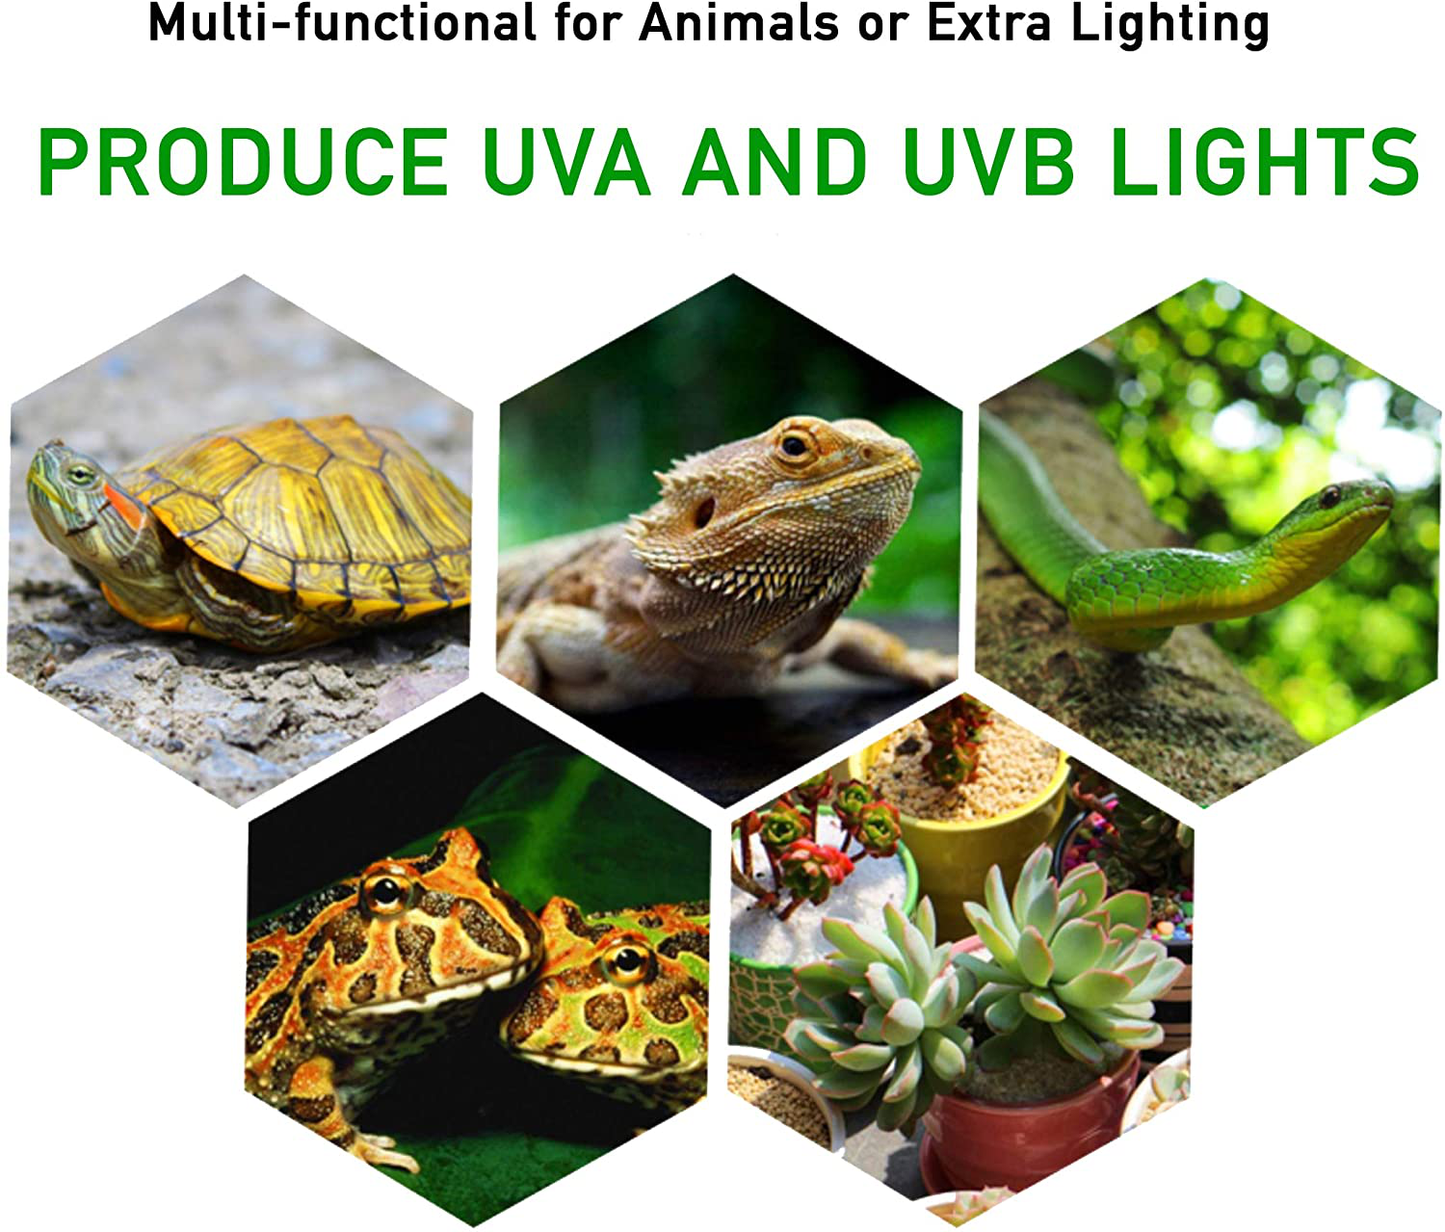 Calpalmy 25W Reptile UVA/UVB Lamp - with Lengthened Adjustable Feature | Adjustable Stand - for Bird Lizard Turtle Snake Aquarium Habitat Heat Lamps & Light Bulbs - 2-Pack